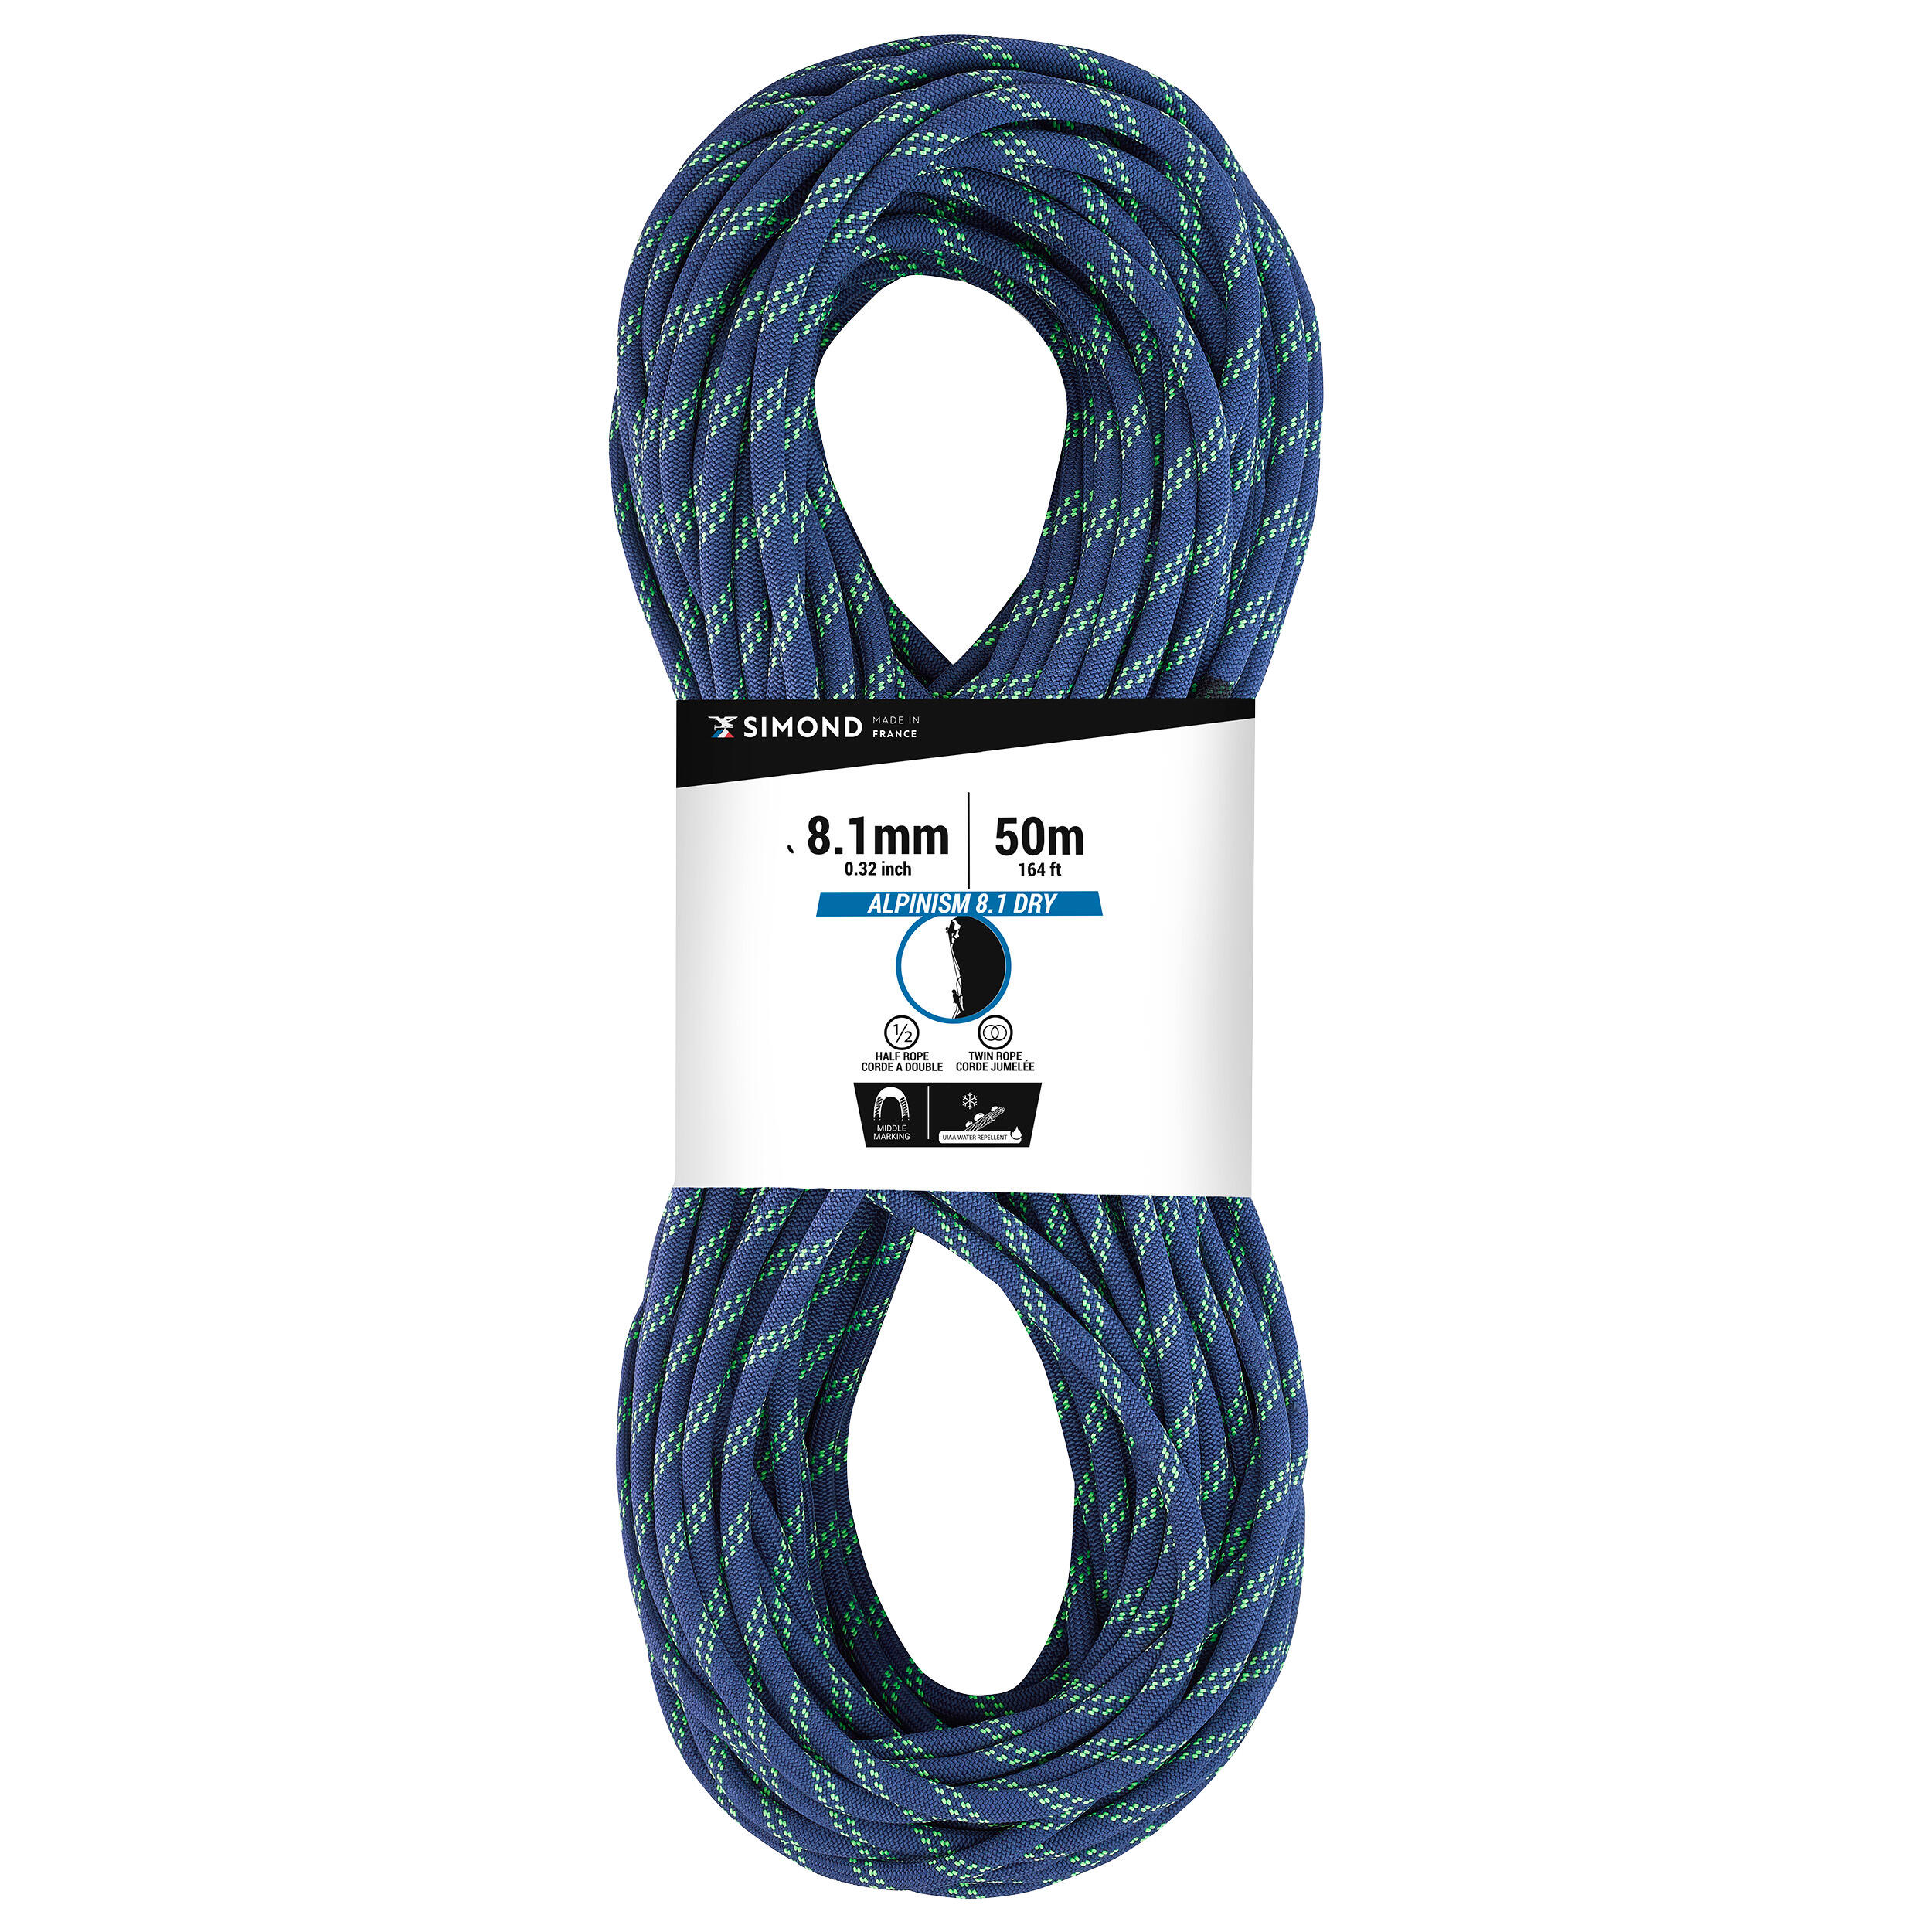 SIMOND CLIMBING AND MOUNTAINEERING HALF ROPE - ABSEIL ALPINISM 8.1 MM X 50M BLUE